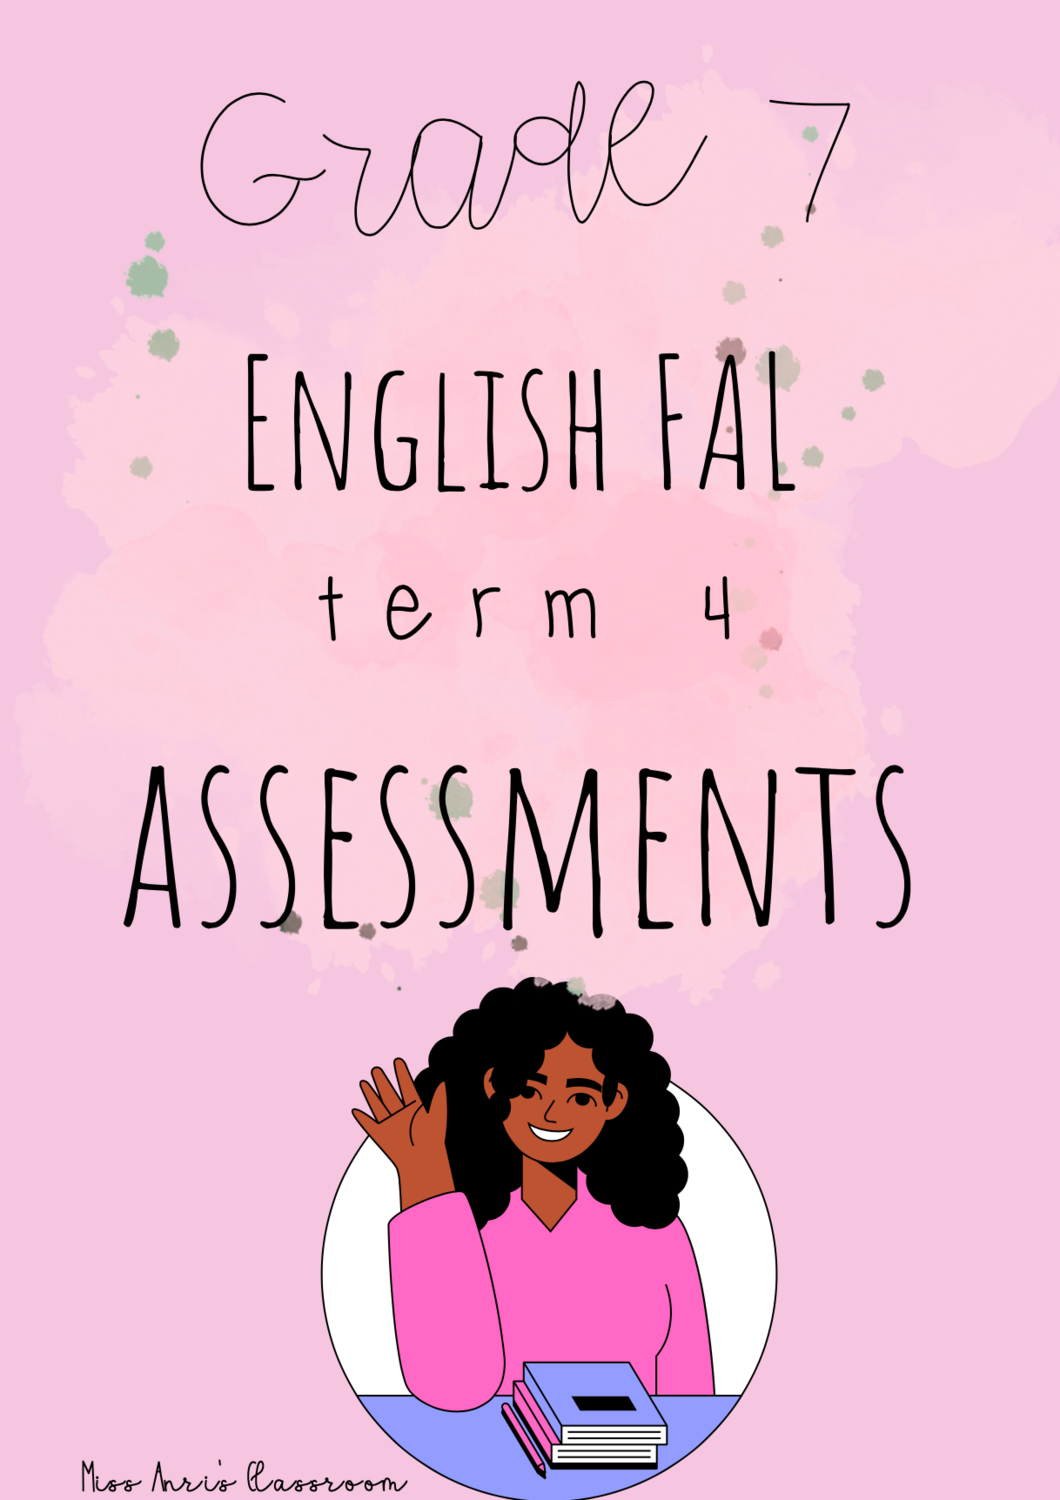 Grade 7 English First Additional Language term 4 assessments